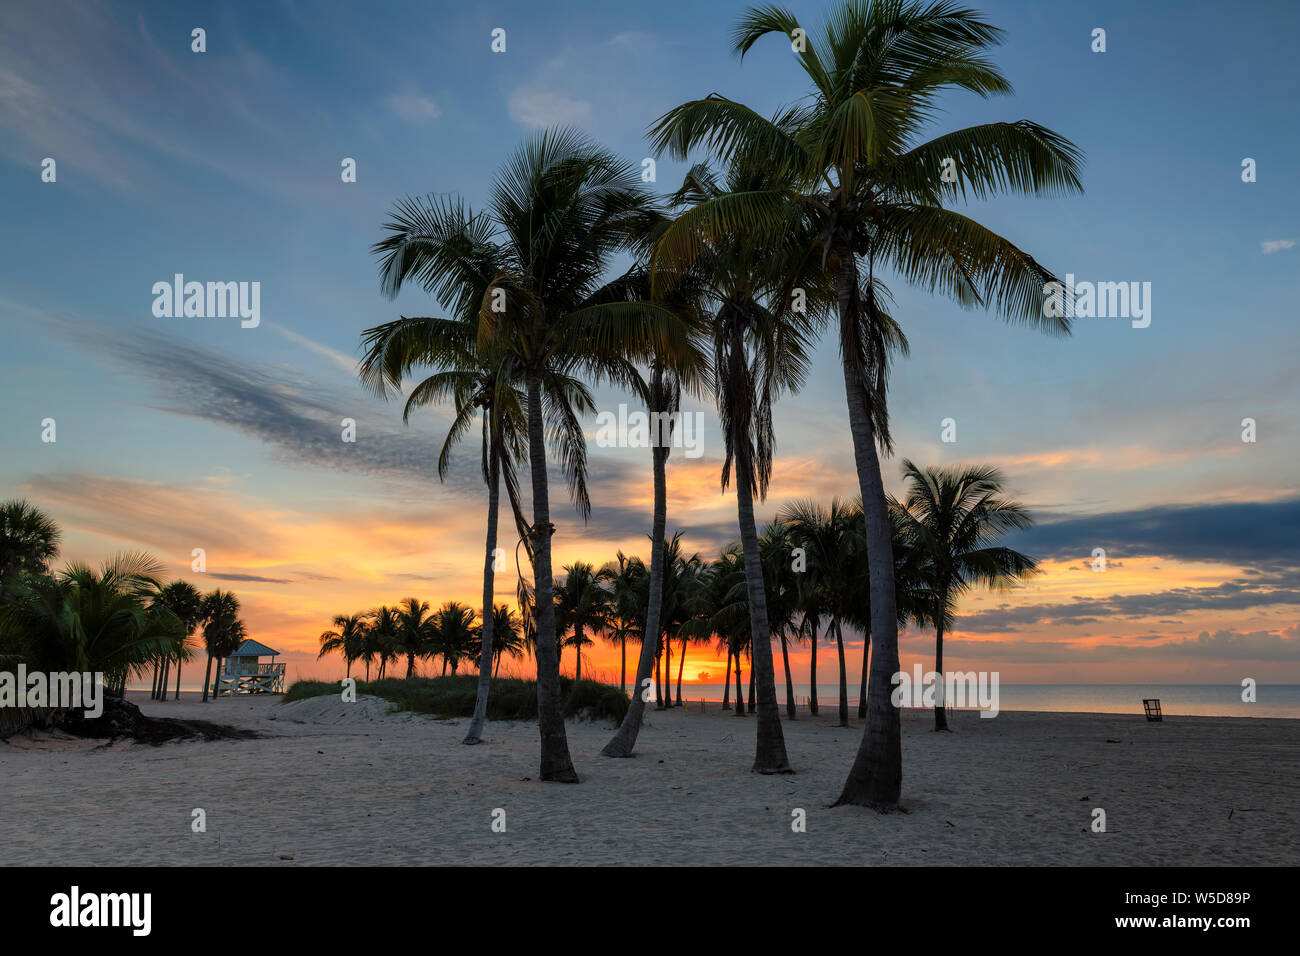 Sunrise at palm trees by the ocean beach in Key Biscayne, Florida Stock Photo